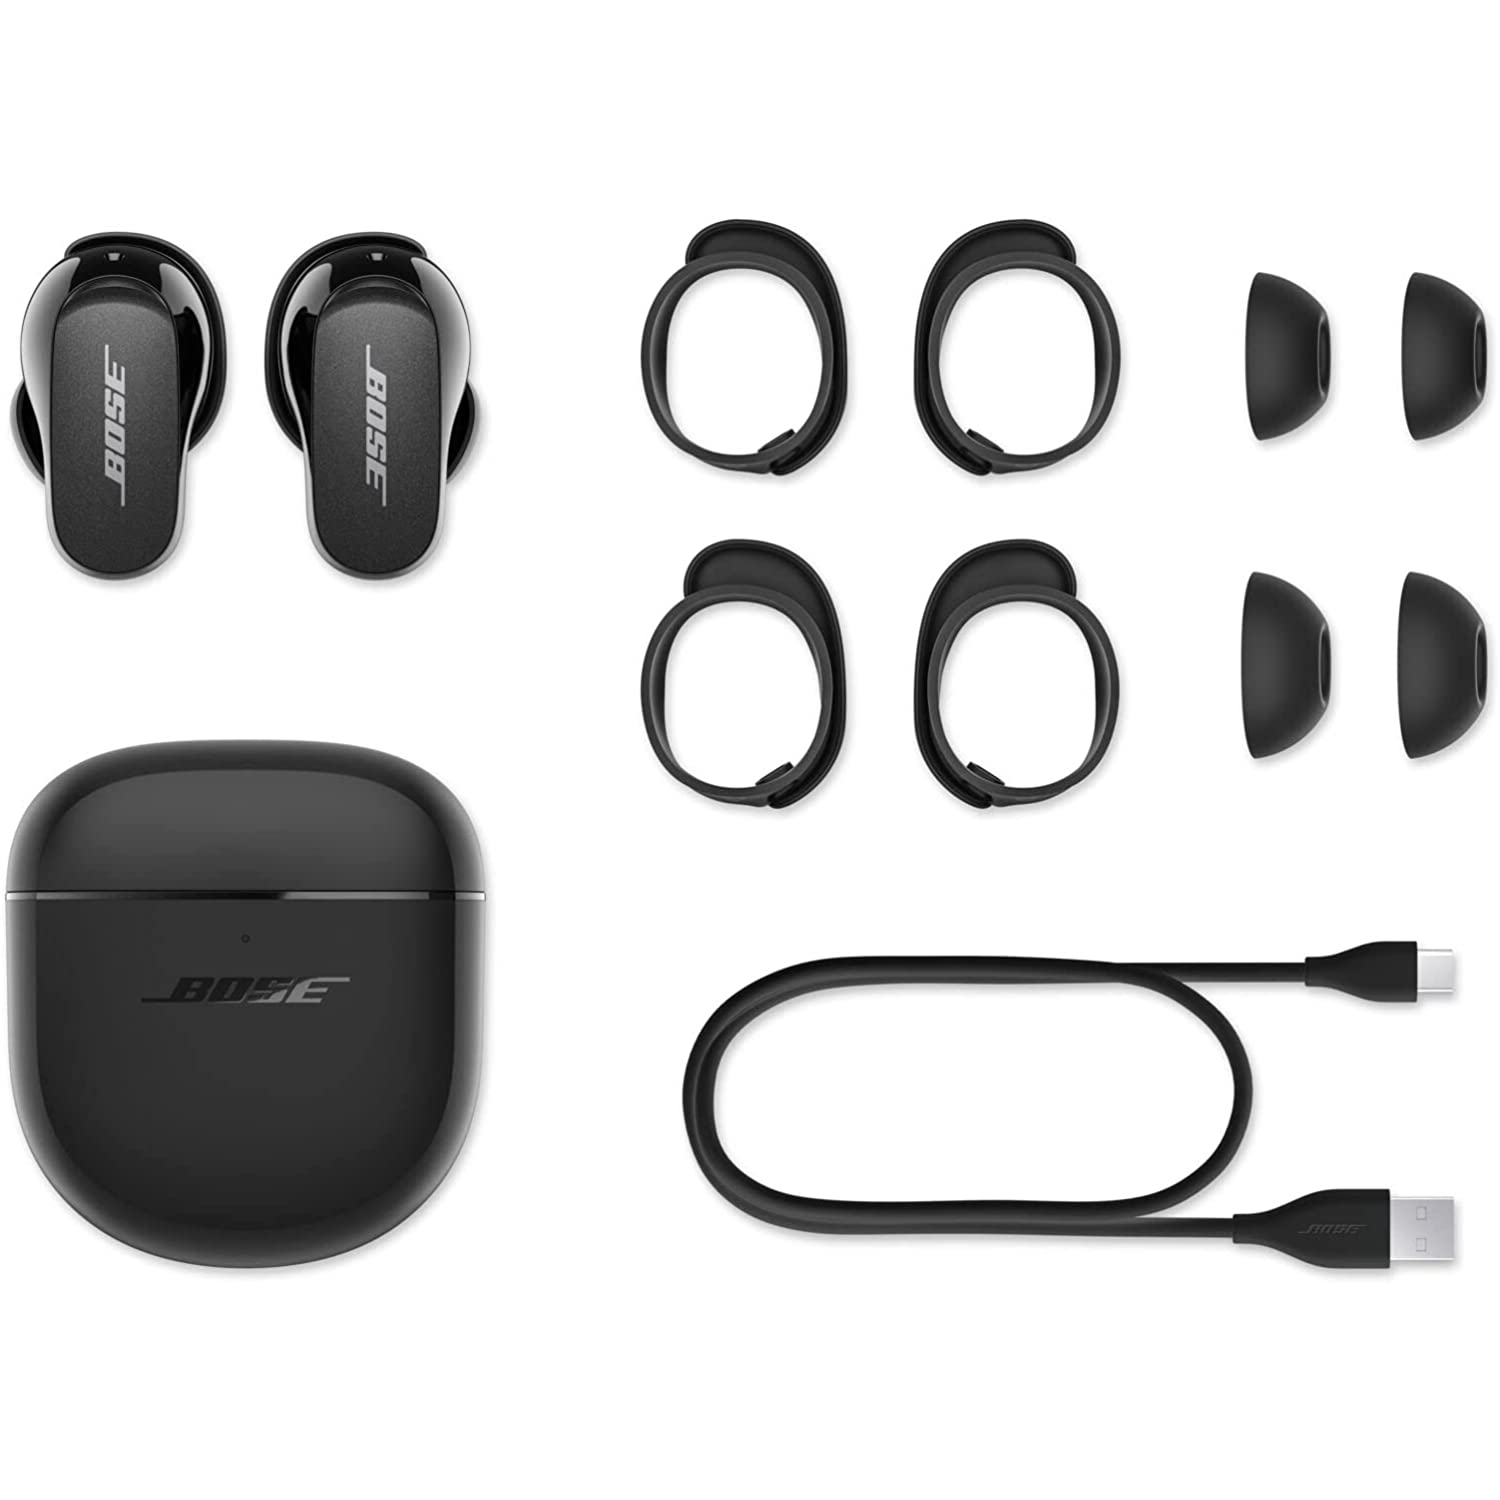 Refurbished (Excellent) - Bose QuietComfort II Noise Cancelling